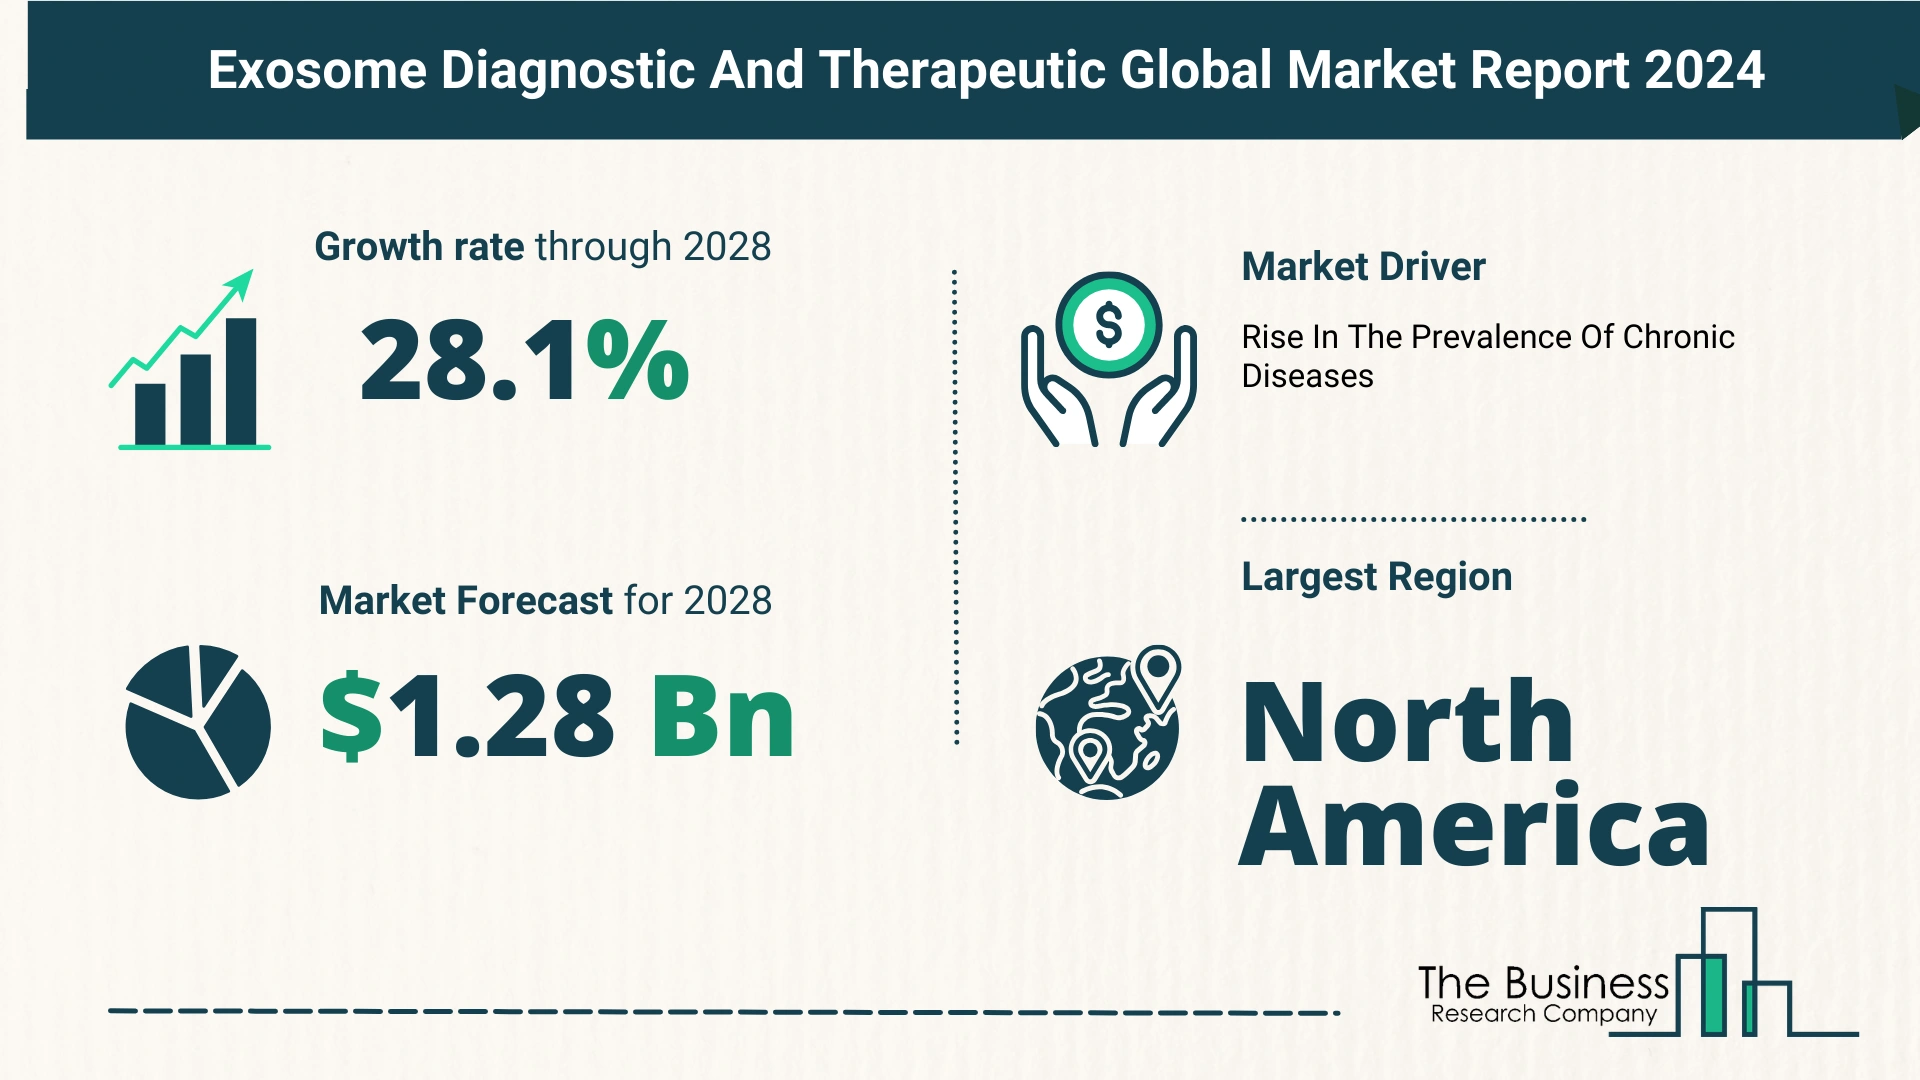 Global Exosome Diagnostic And Therapeutic Market Trends